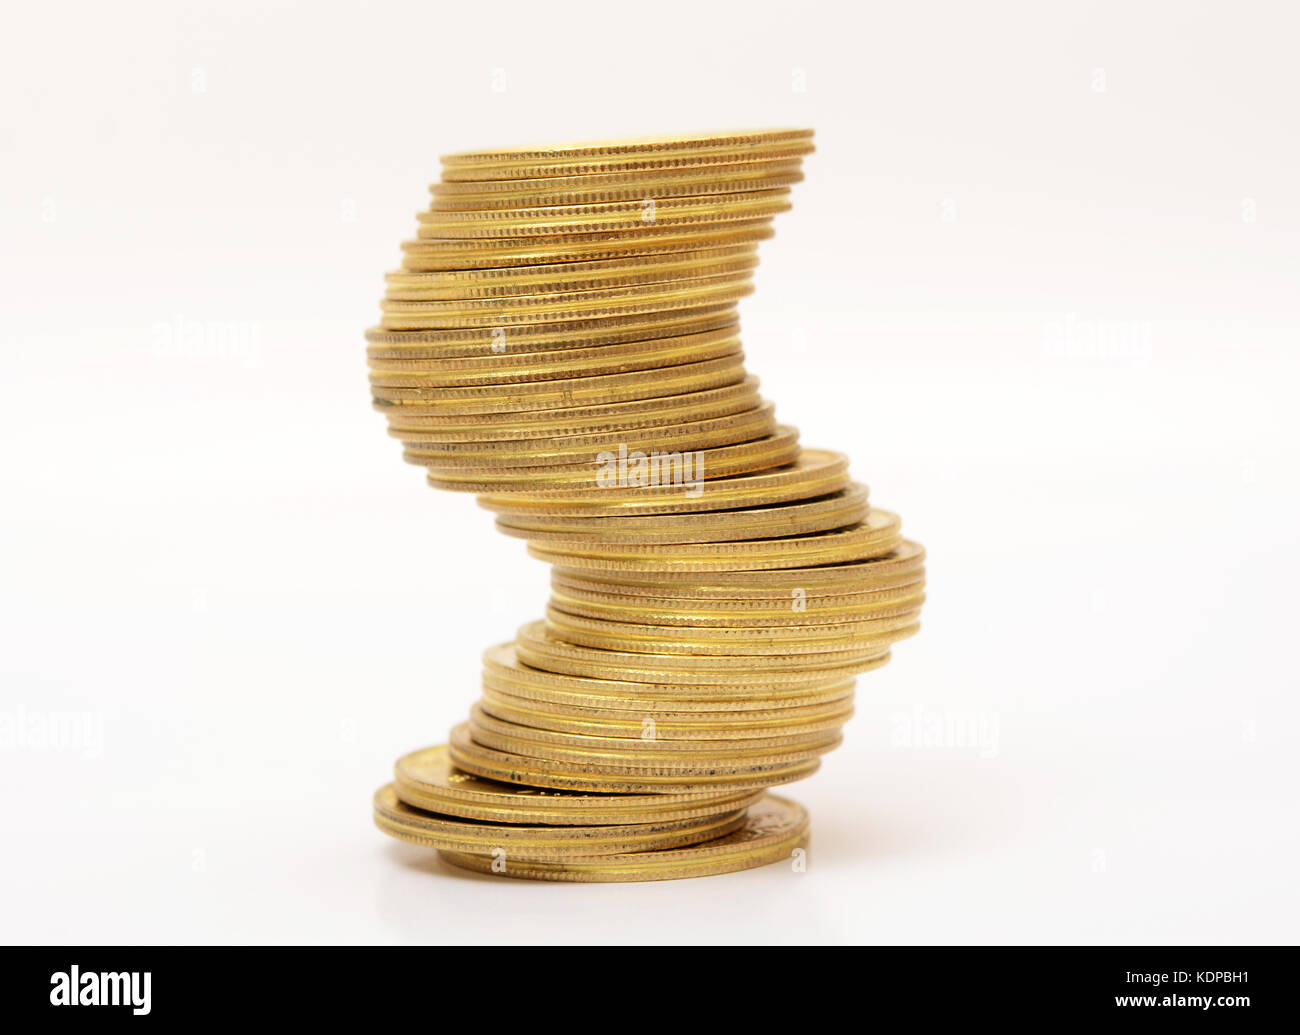 Unstable stack of gold coins Risk Concept. Stock Photo